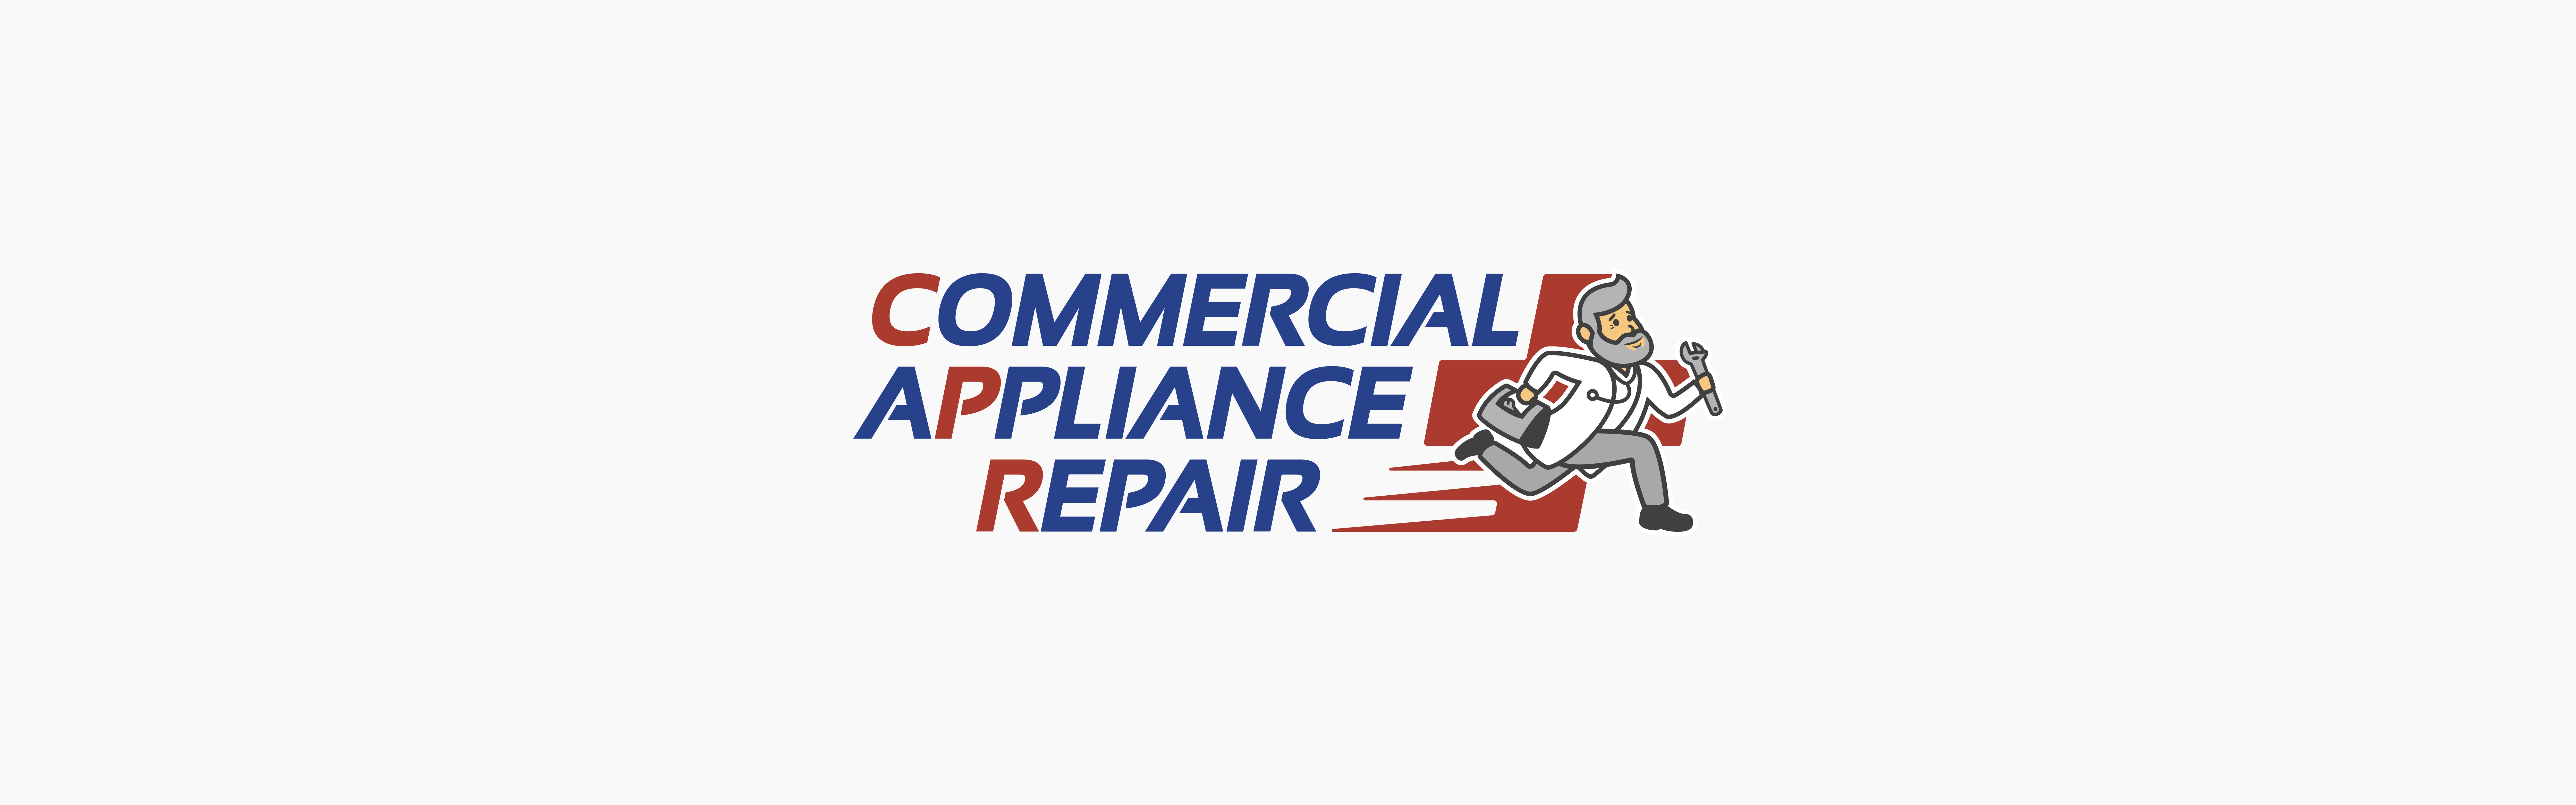 Logo depicting a cartoon character dressed as a repair person with a wrench, representing a commercial appliance repair service.